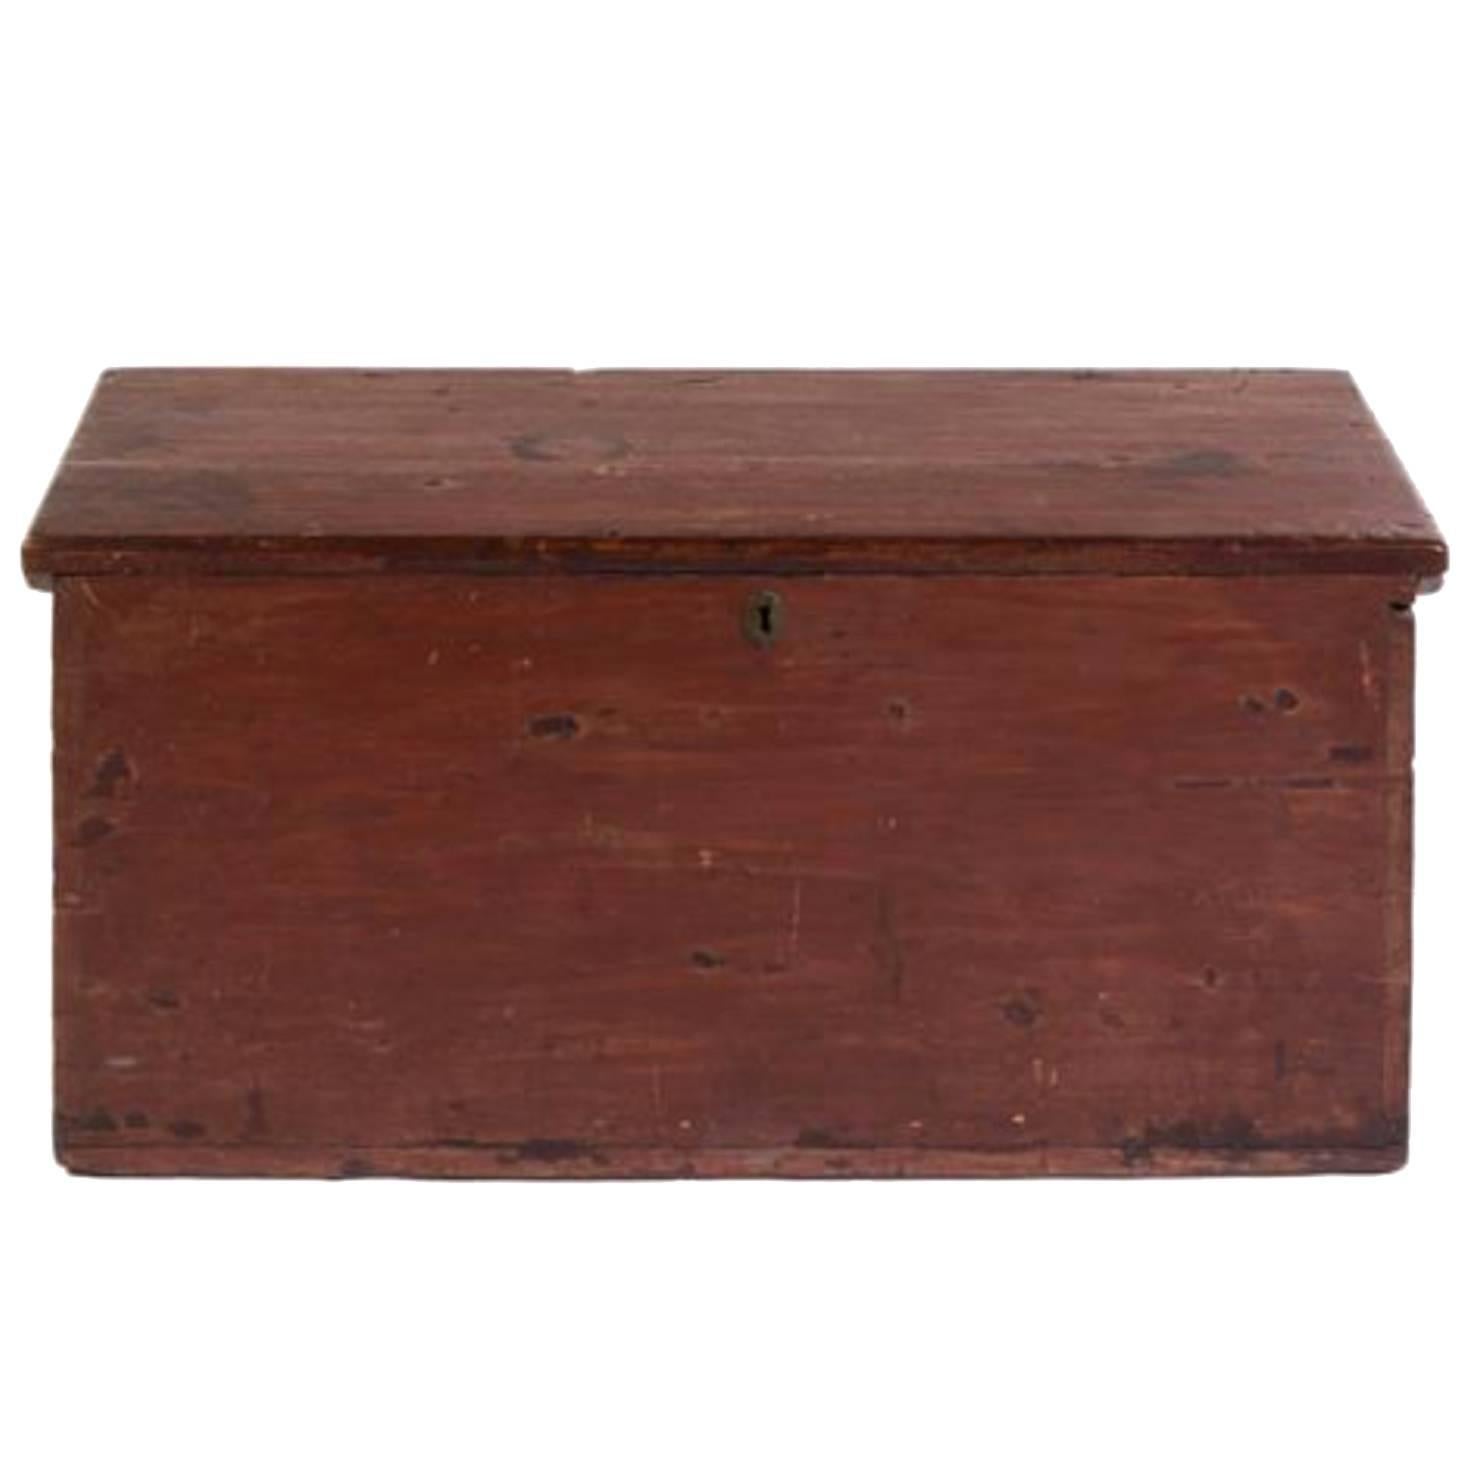 Handsome 19th Century American Painted Trunk with Lovely Worn Painted Finish For Sale